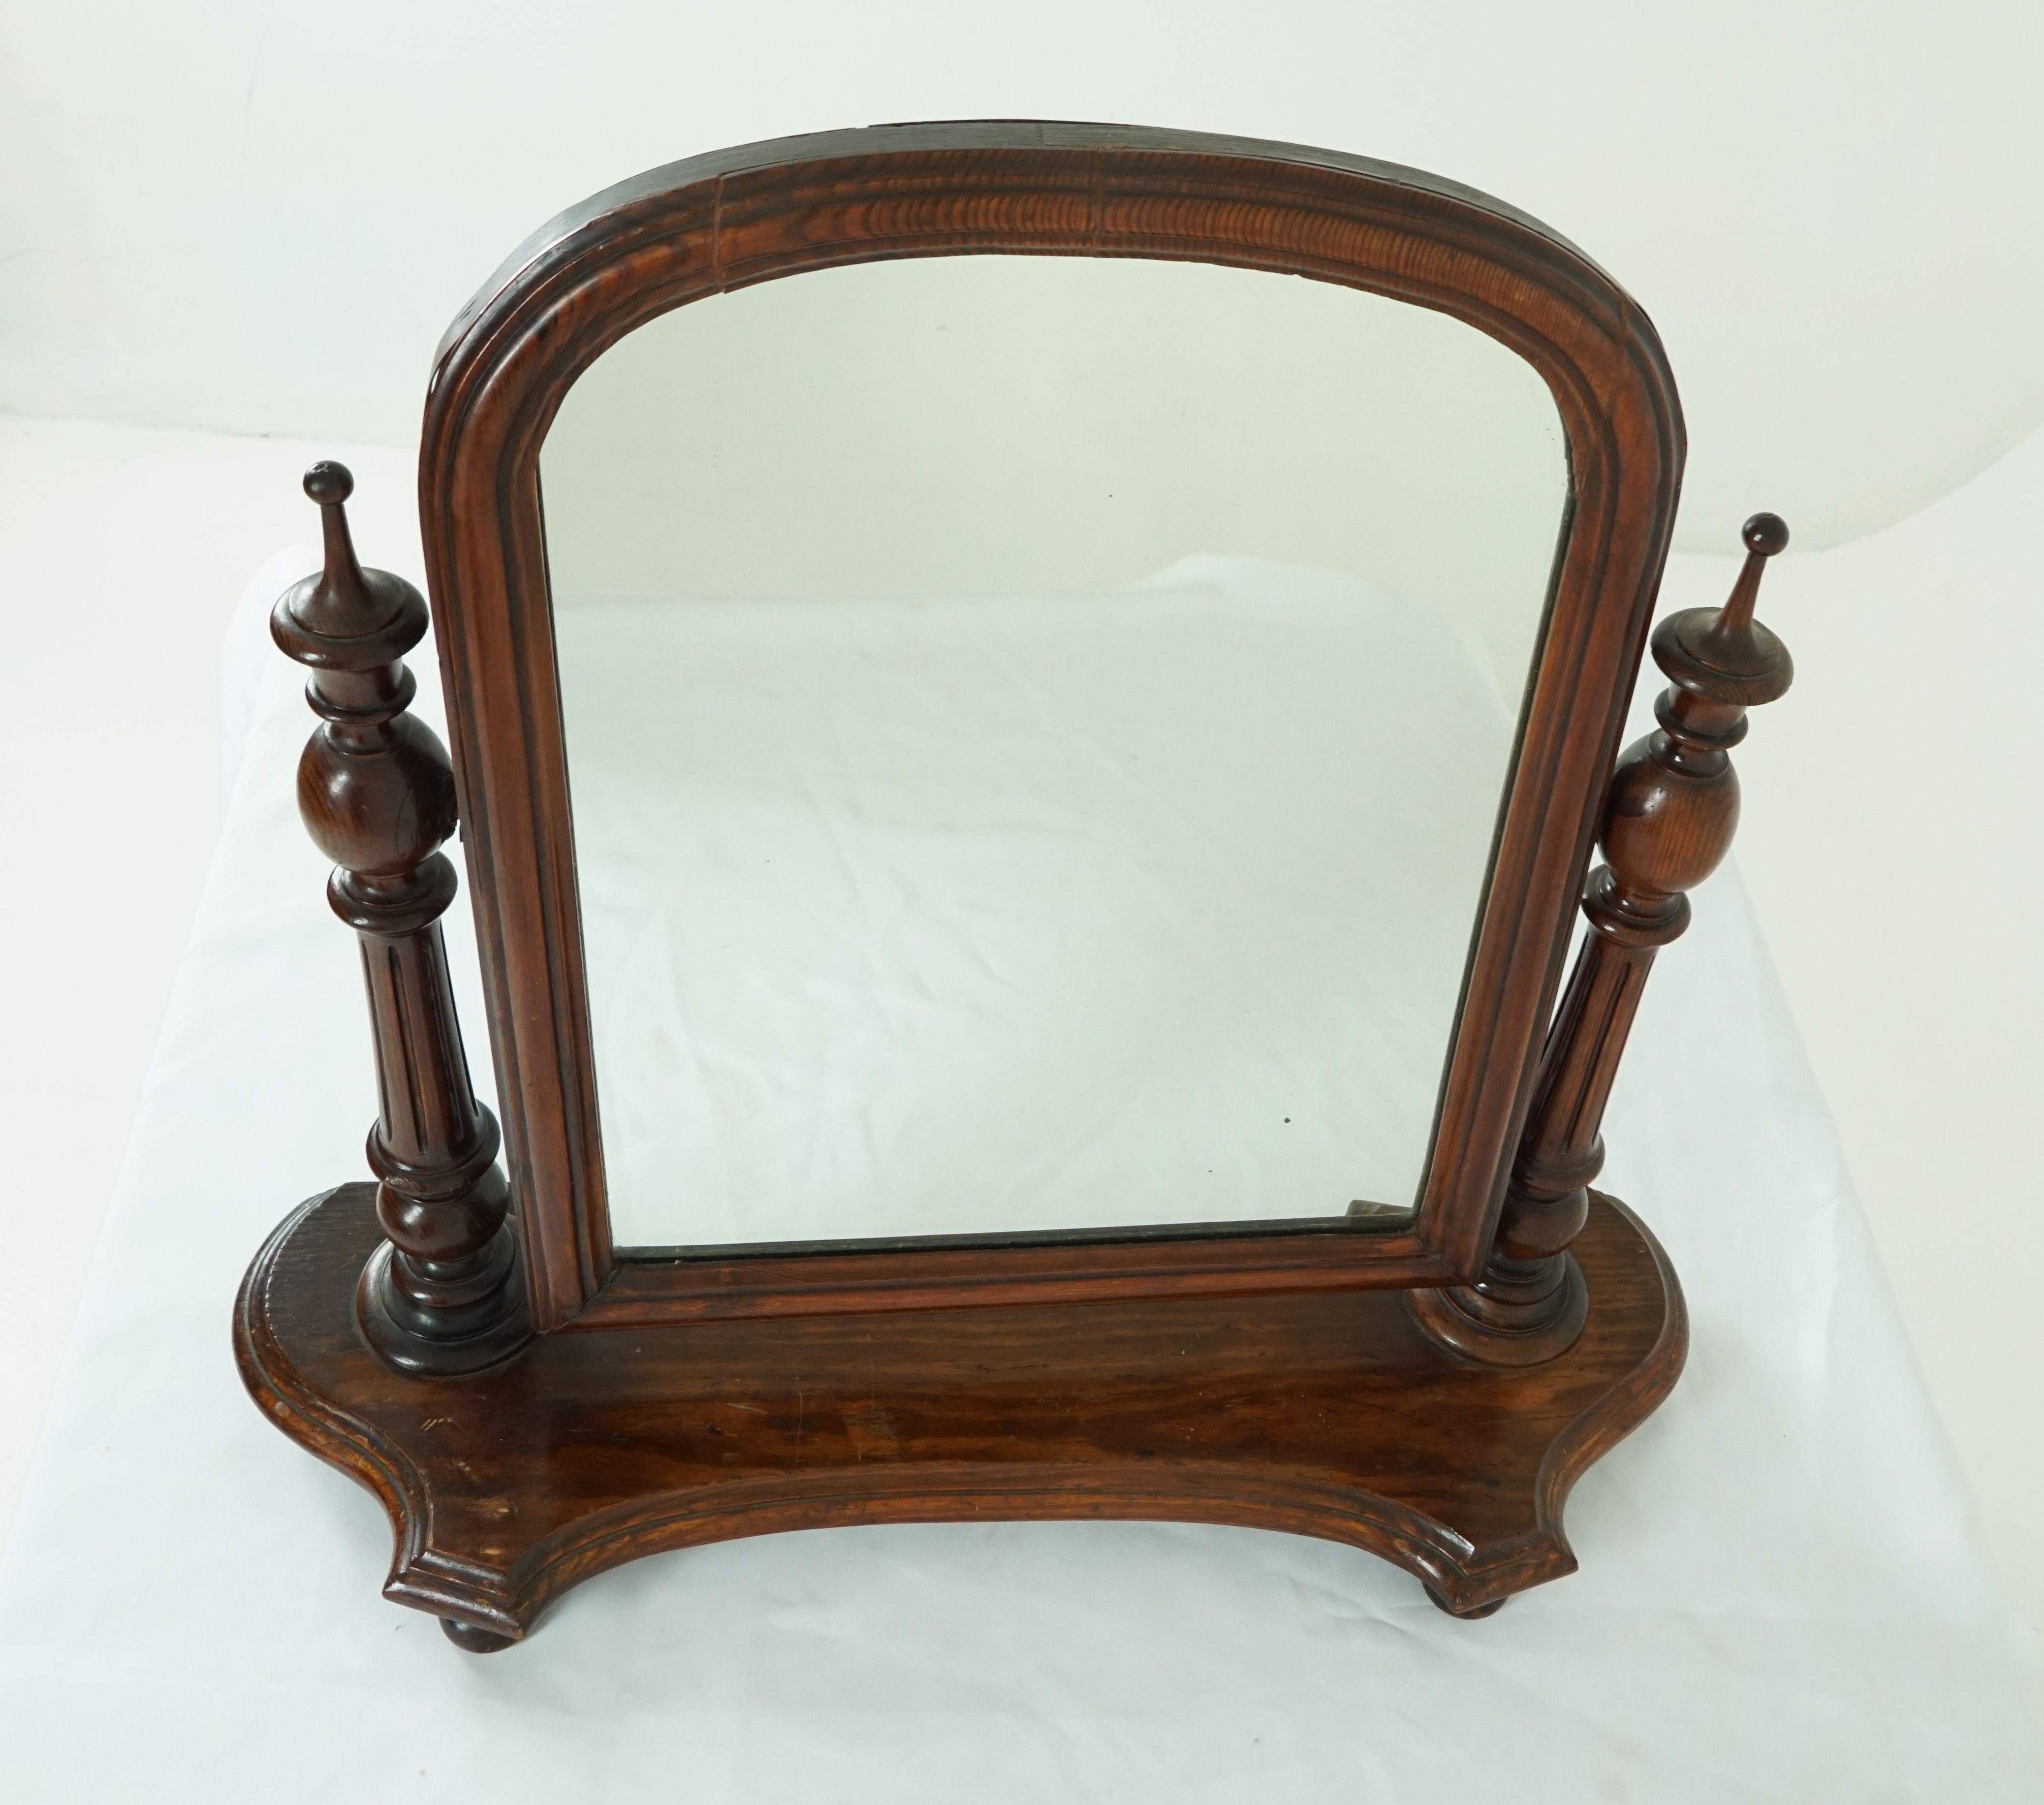 Scottish Antique Victorian Pitch Pine Dressing Table Mirror On Stand, Scotland 1870, 1774